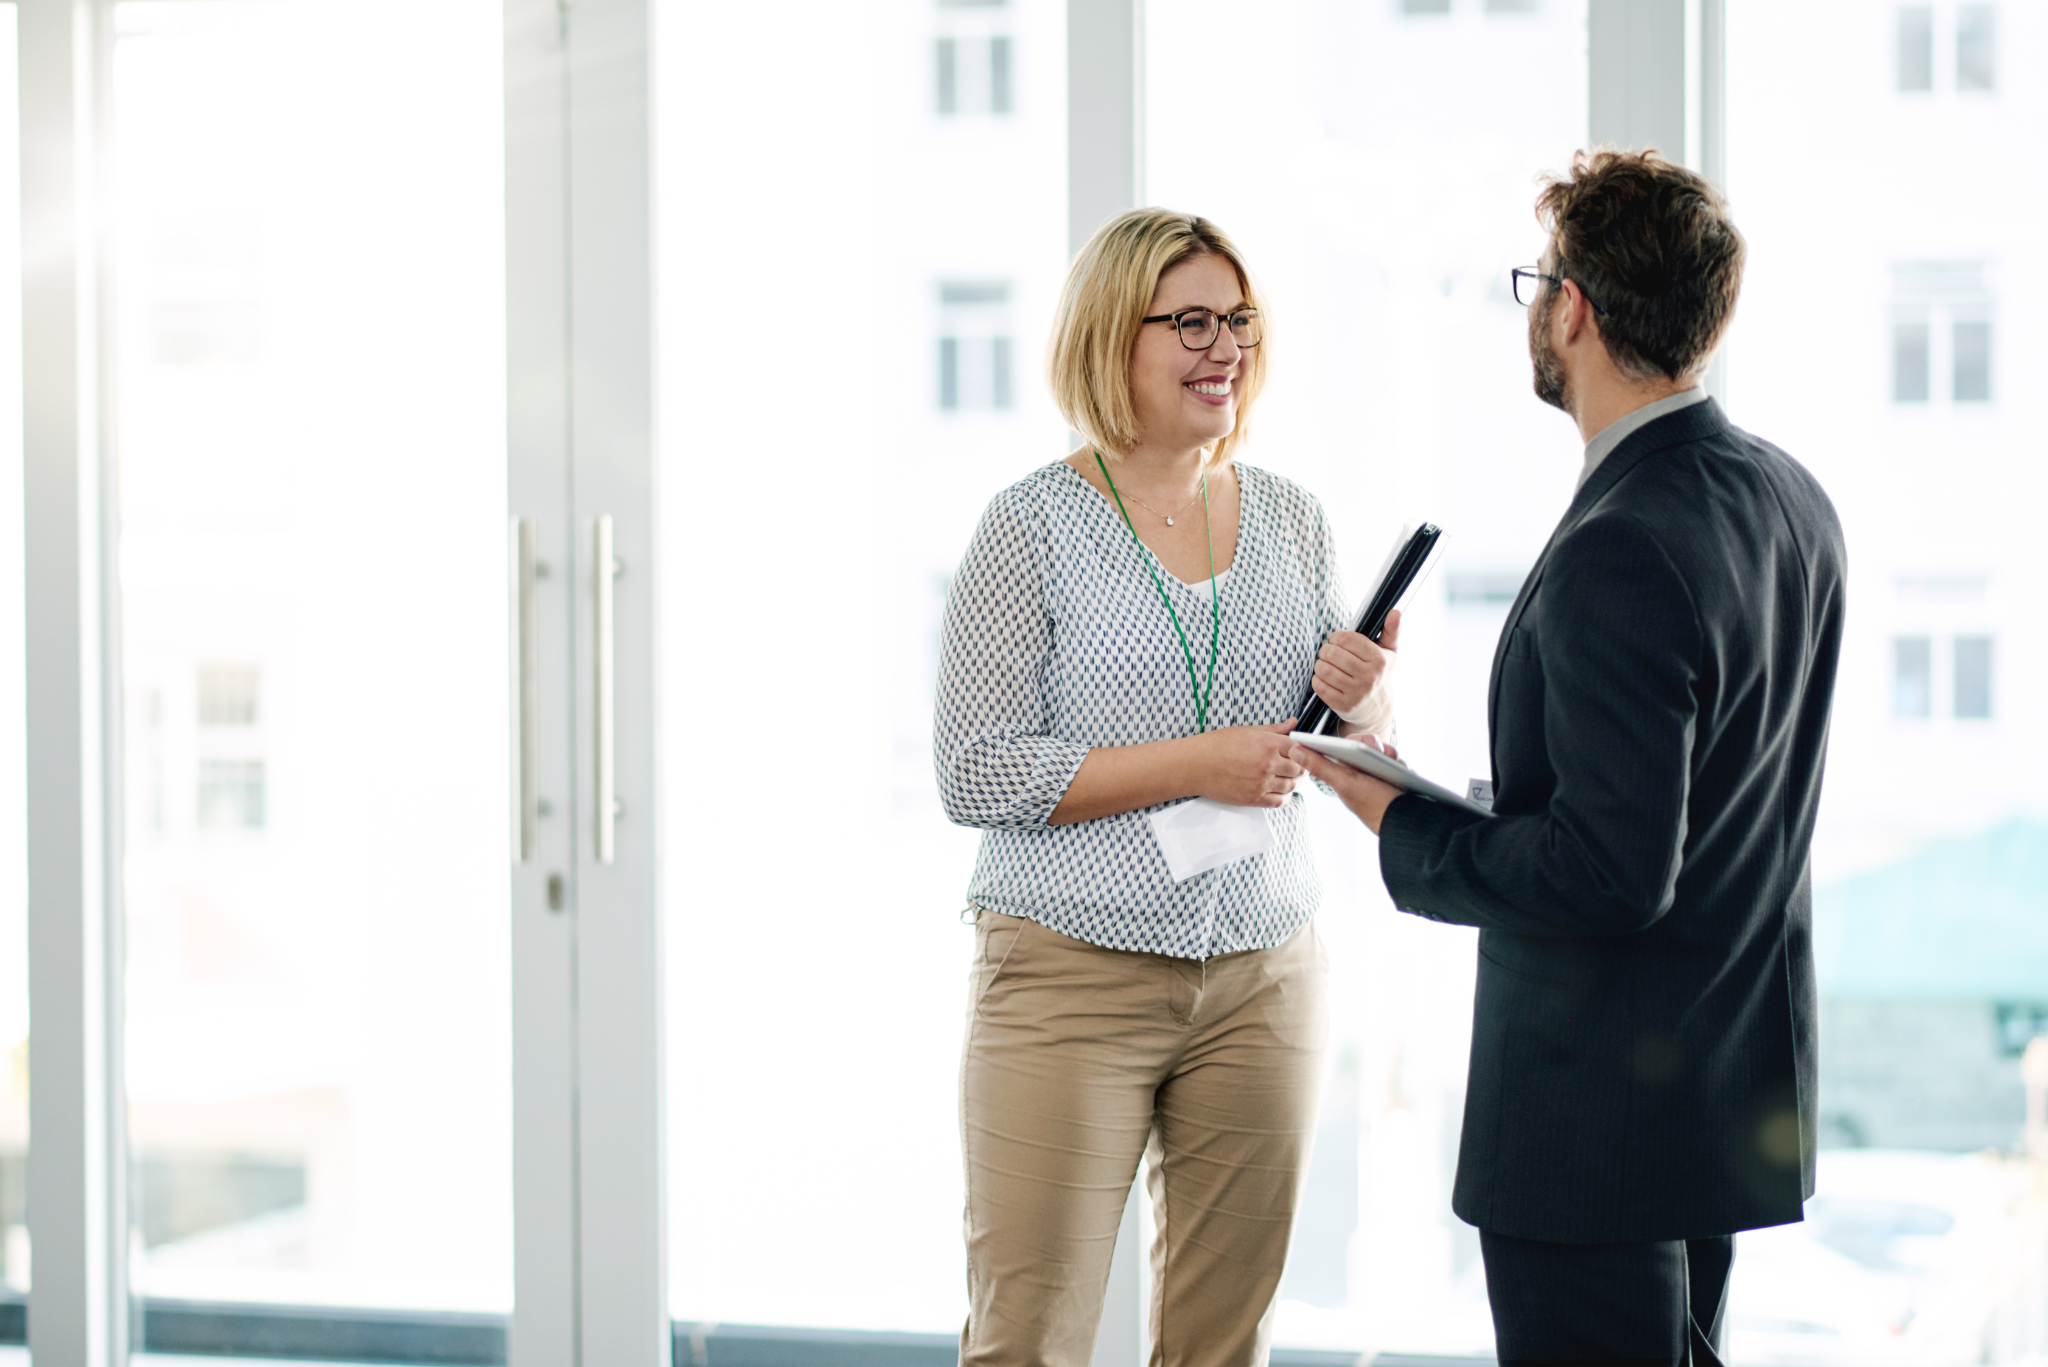 Mastering Small Talk for Meaningful Networking Connections